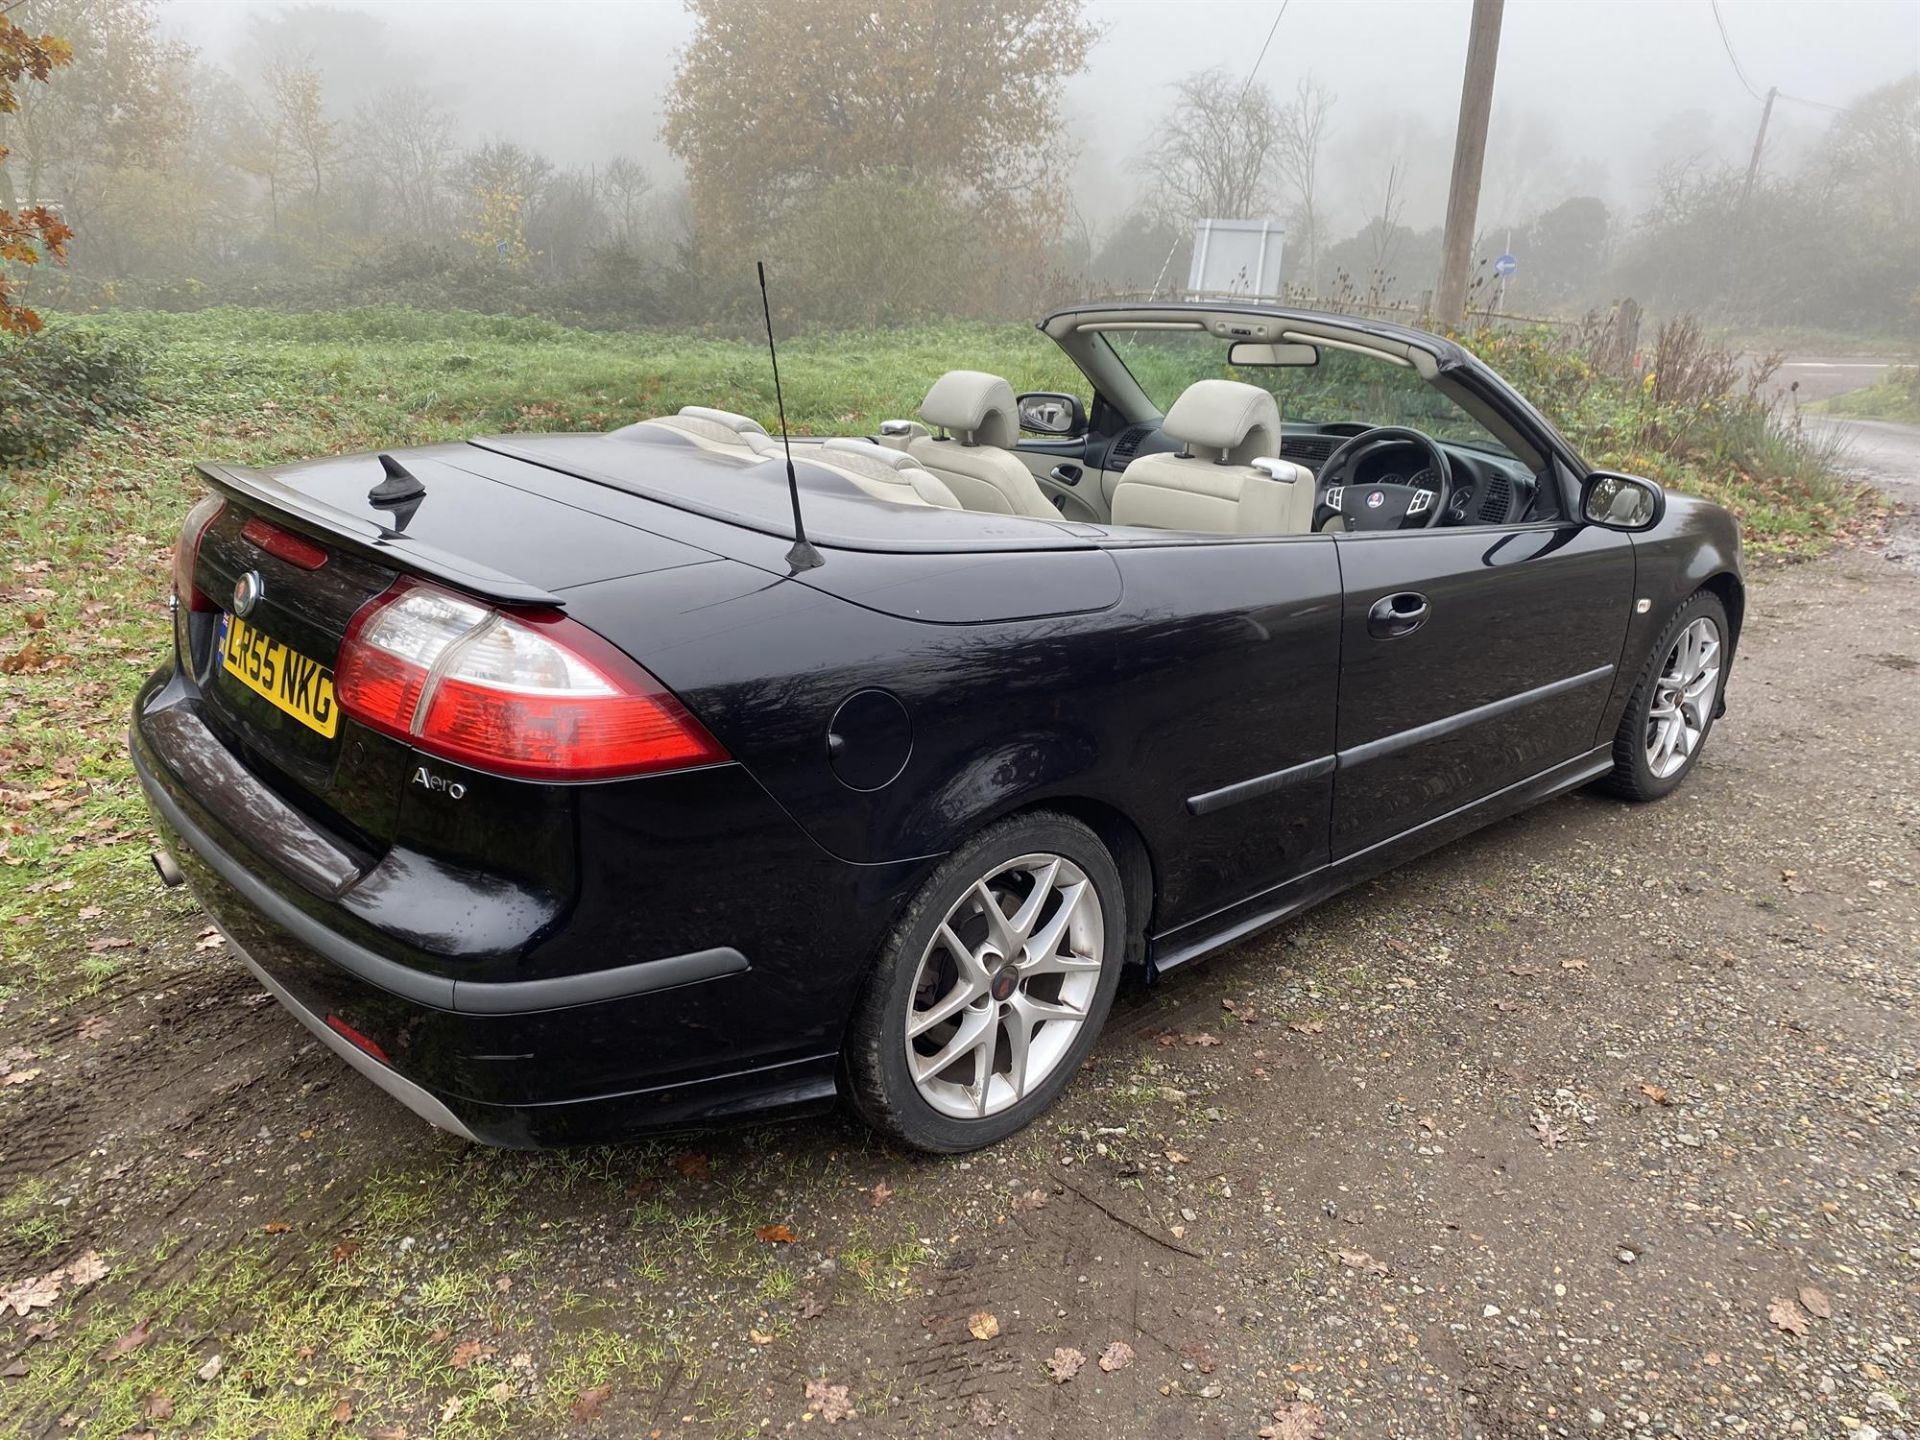 2005 Saab 9-3 AERO convertible. 210bhp manual gearbox. Car has had a revamp for BHP and maybe - Image 2 of 10